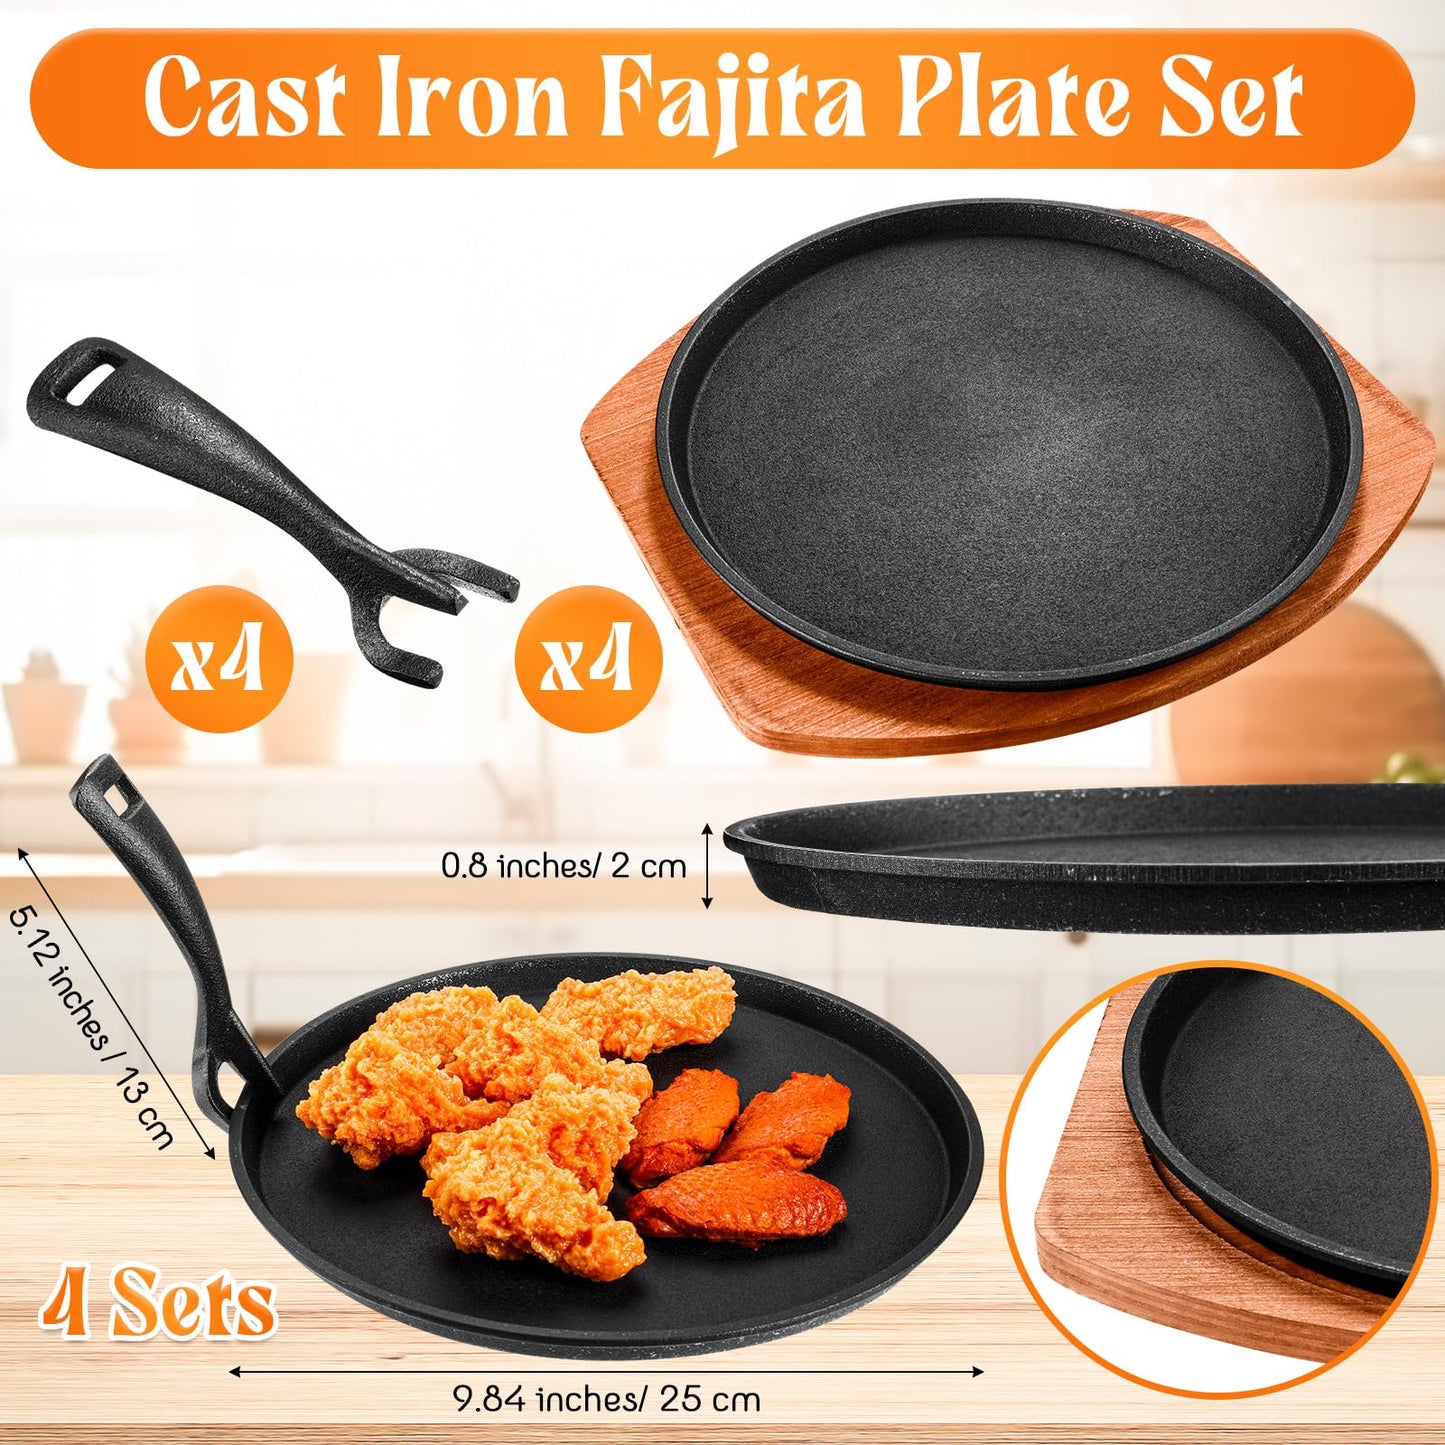 FoldTier Cast Iron Fajita Plate Set 9.84'' Steak Plate Sizzling Pan with Wooden Base and Gripper for Home Restaurant Kitchen Catering Cooking for Grilling Meats Seafood(4 Sets)